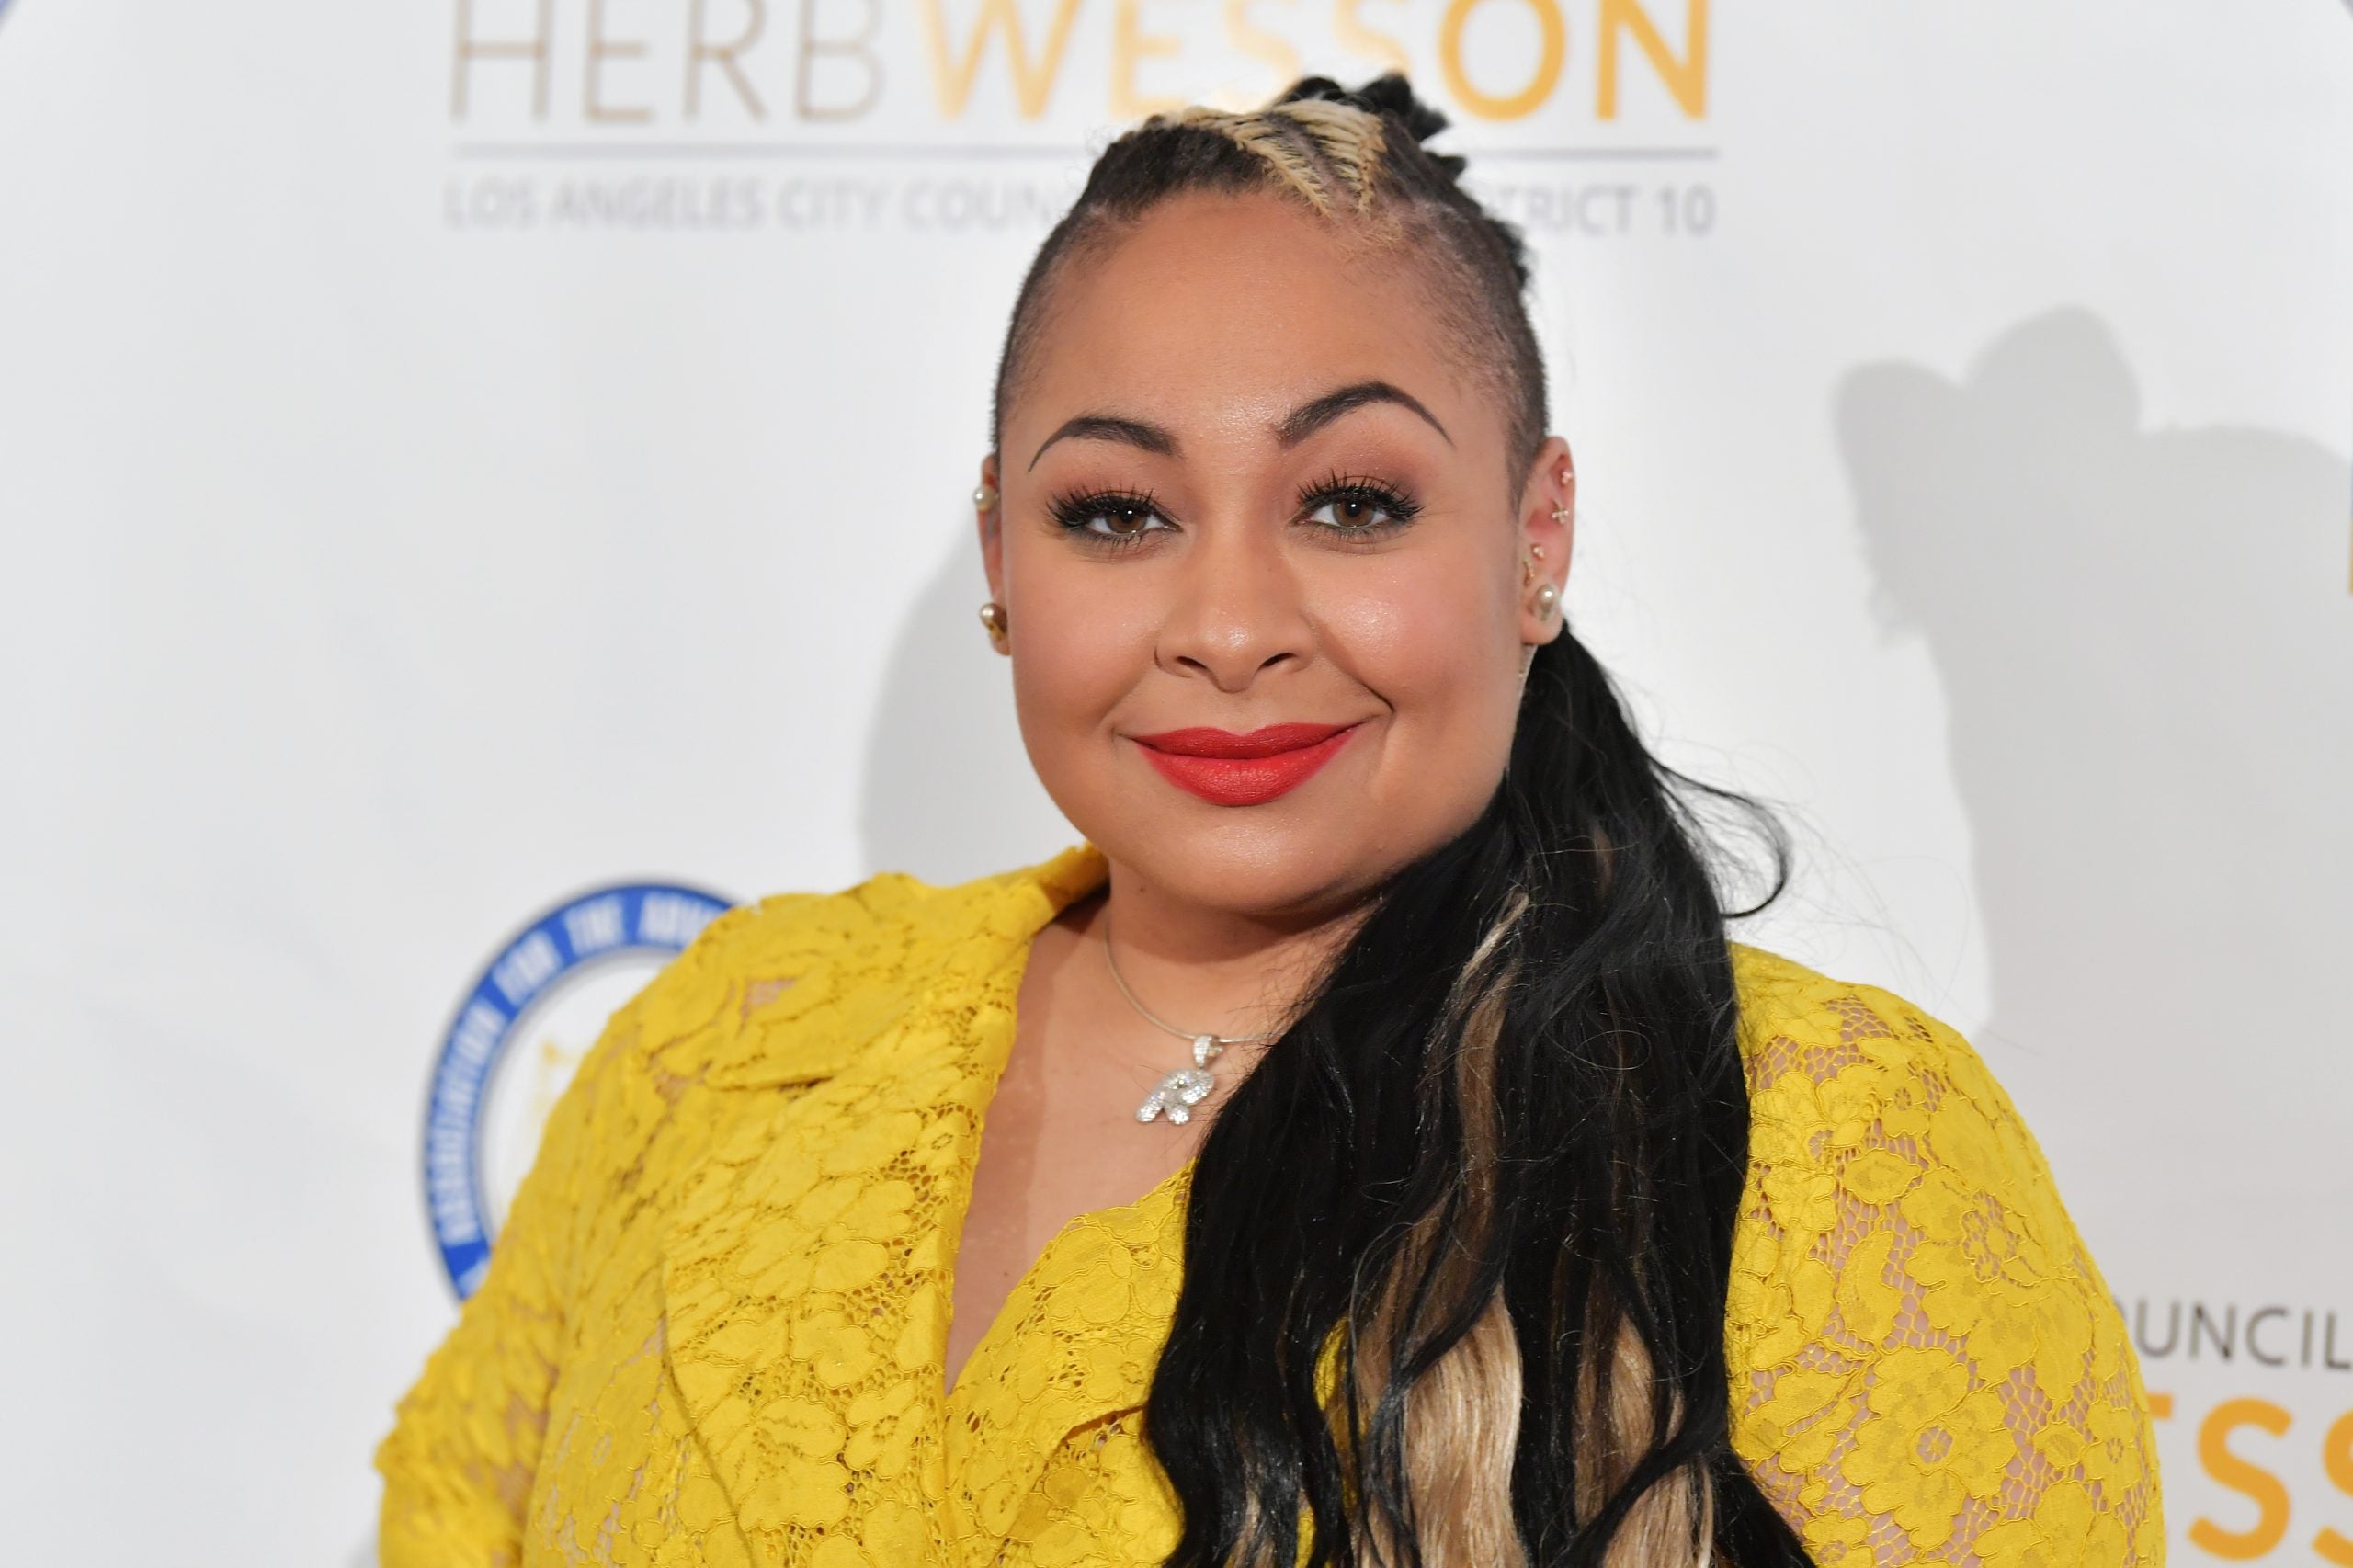 Raven-Symoné Shows Off 28-Pound Weight Loss: "I Got A Whole Different Face Going On"